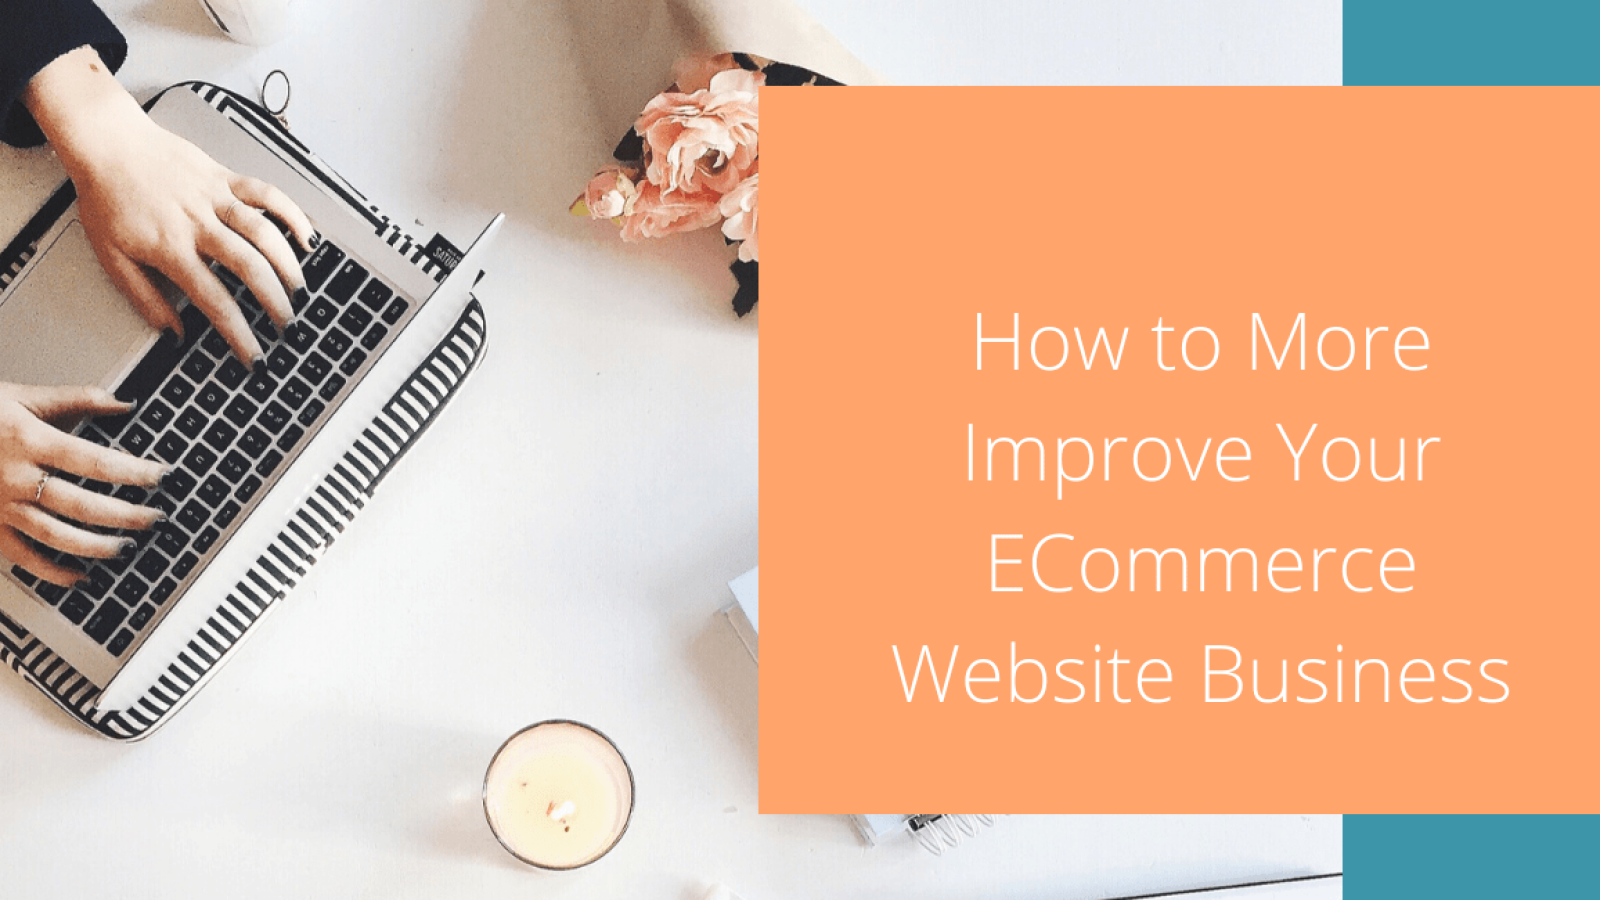 Improve Your ECommerce Website Business